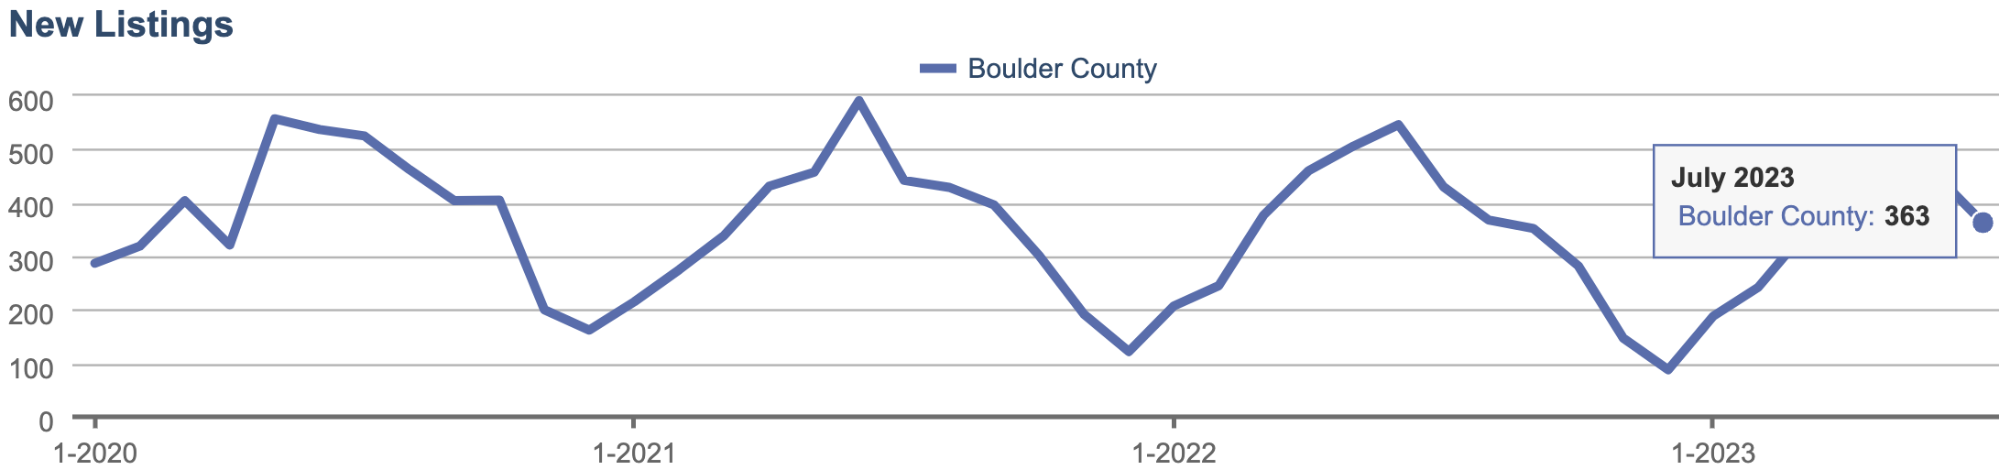 New Listings Per Month in Boulder County Since 2020